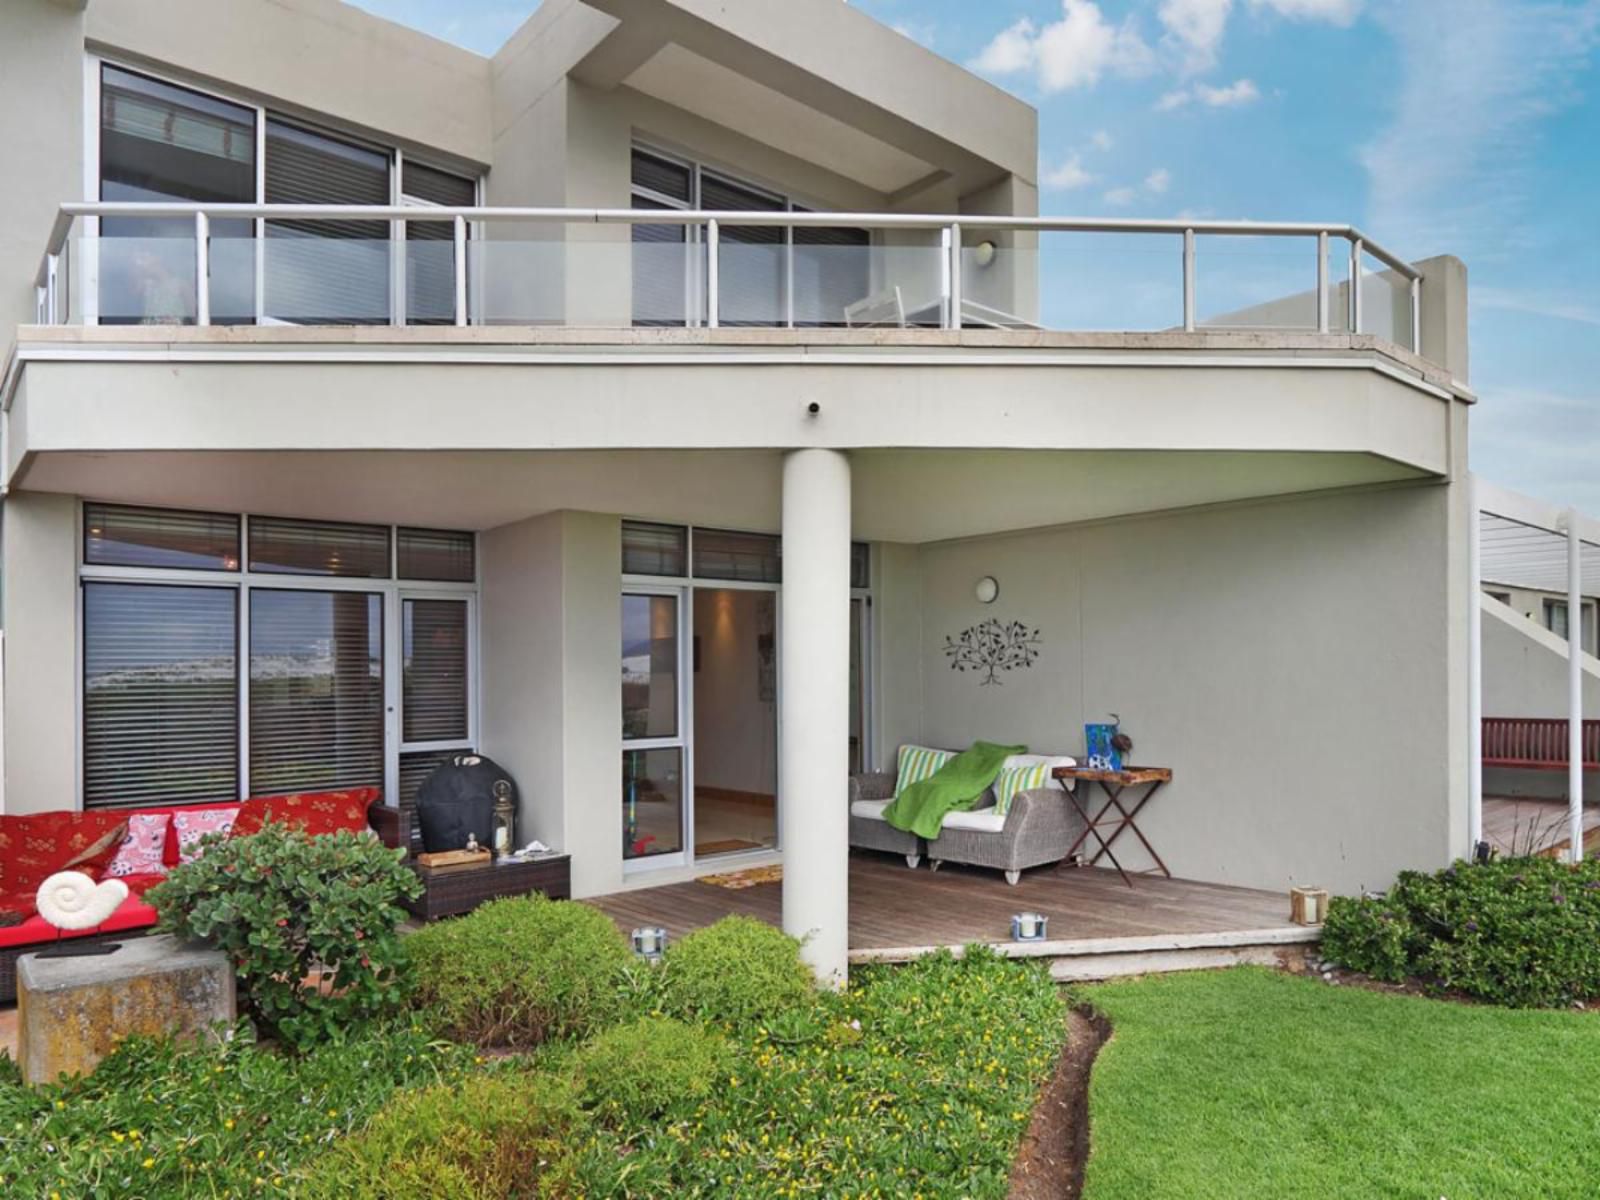 Dolphin Beach E5 By Hostagents Blouberg Cape Town Western Cape South Africa Balcony, Architecture, House, Building